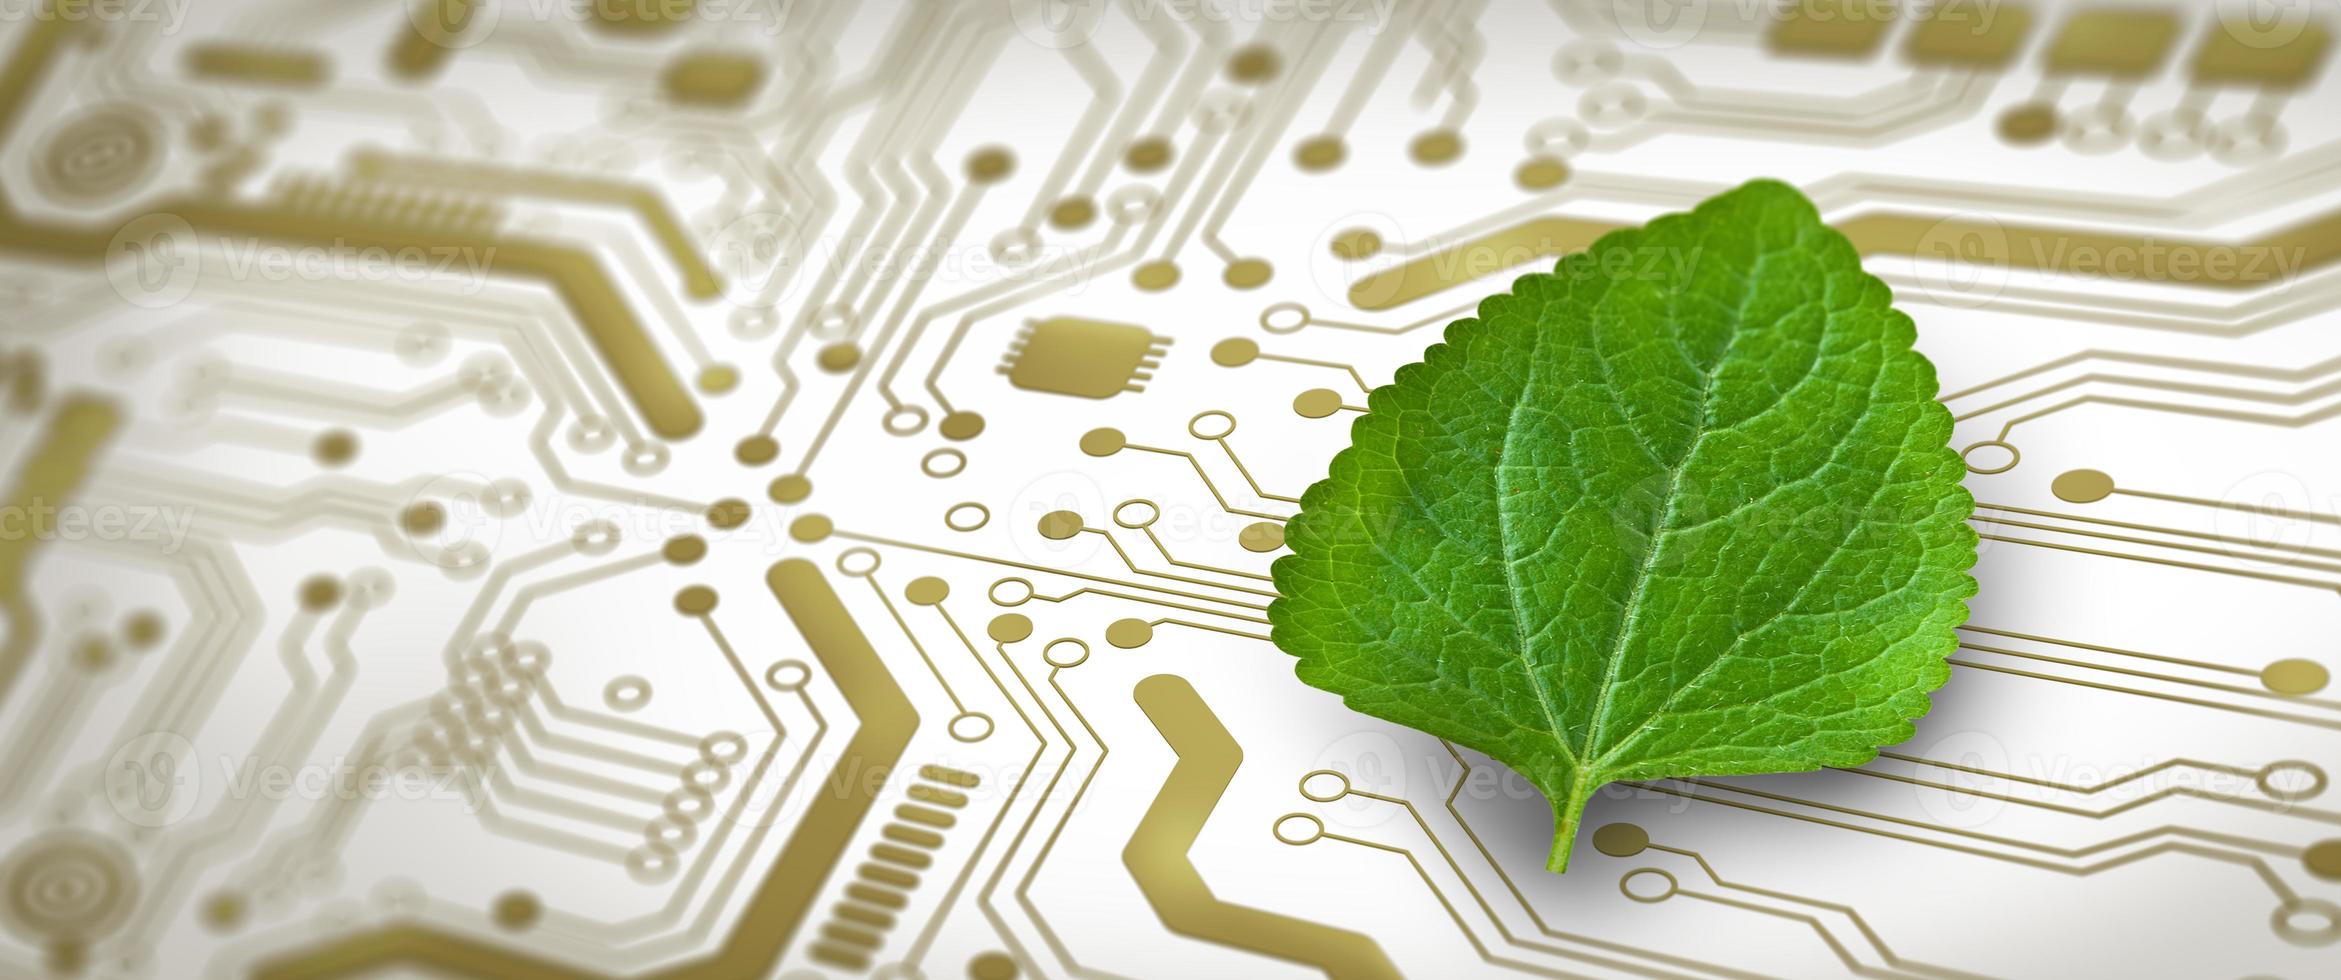 Green Computing, Green Technology, Green IT, csr, and IT ethics Concept. photo